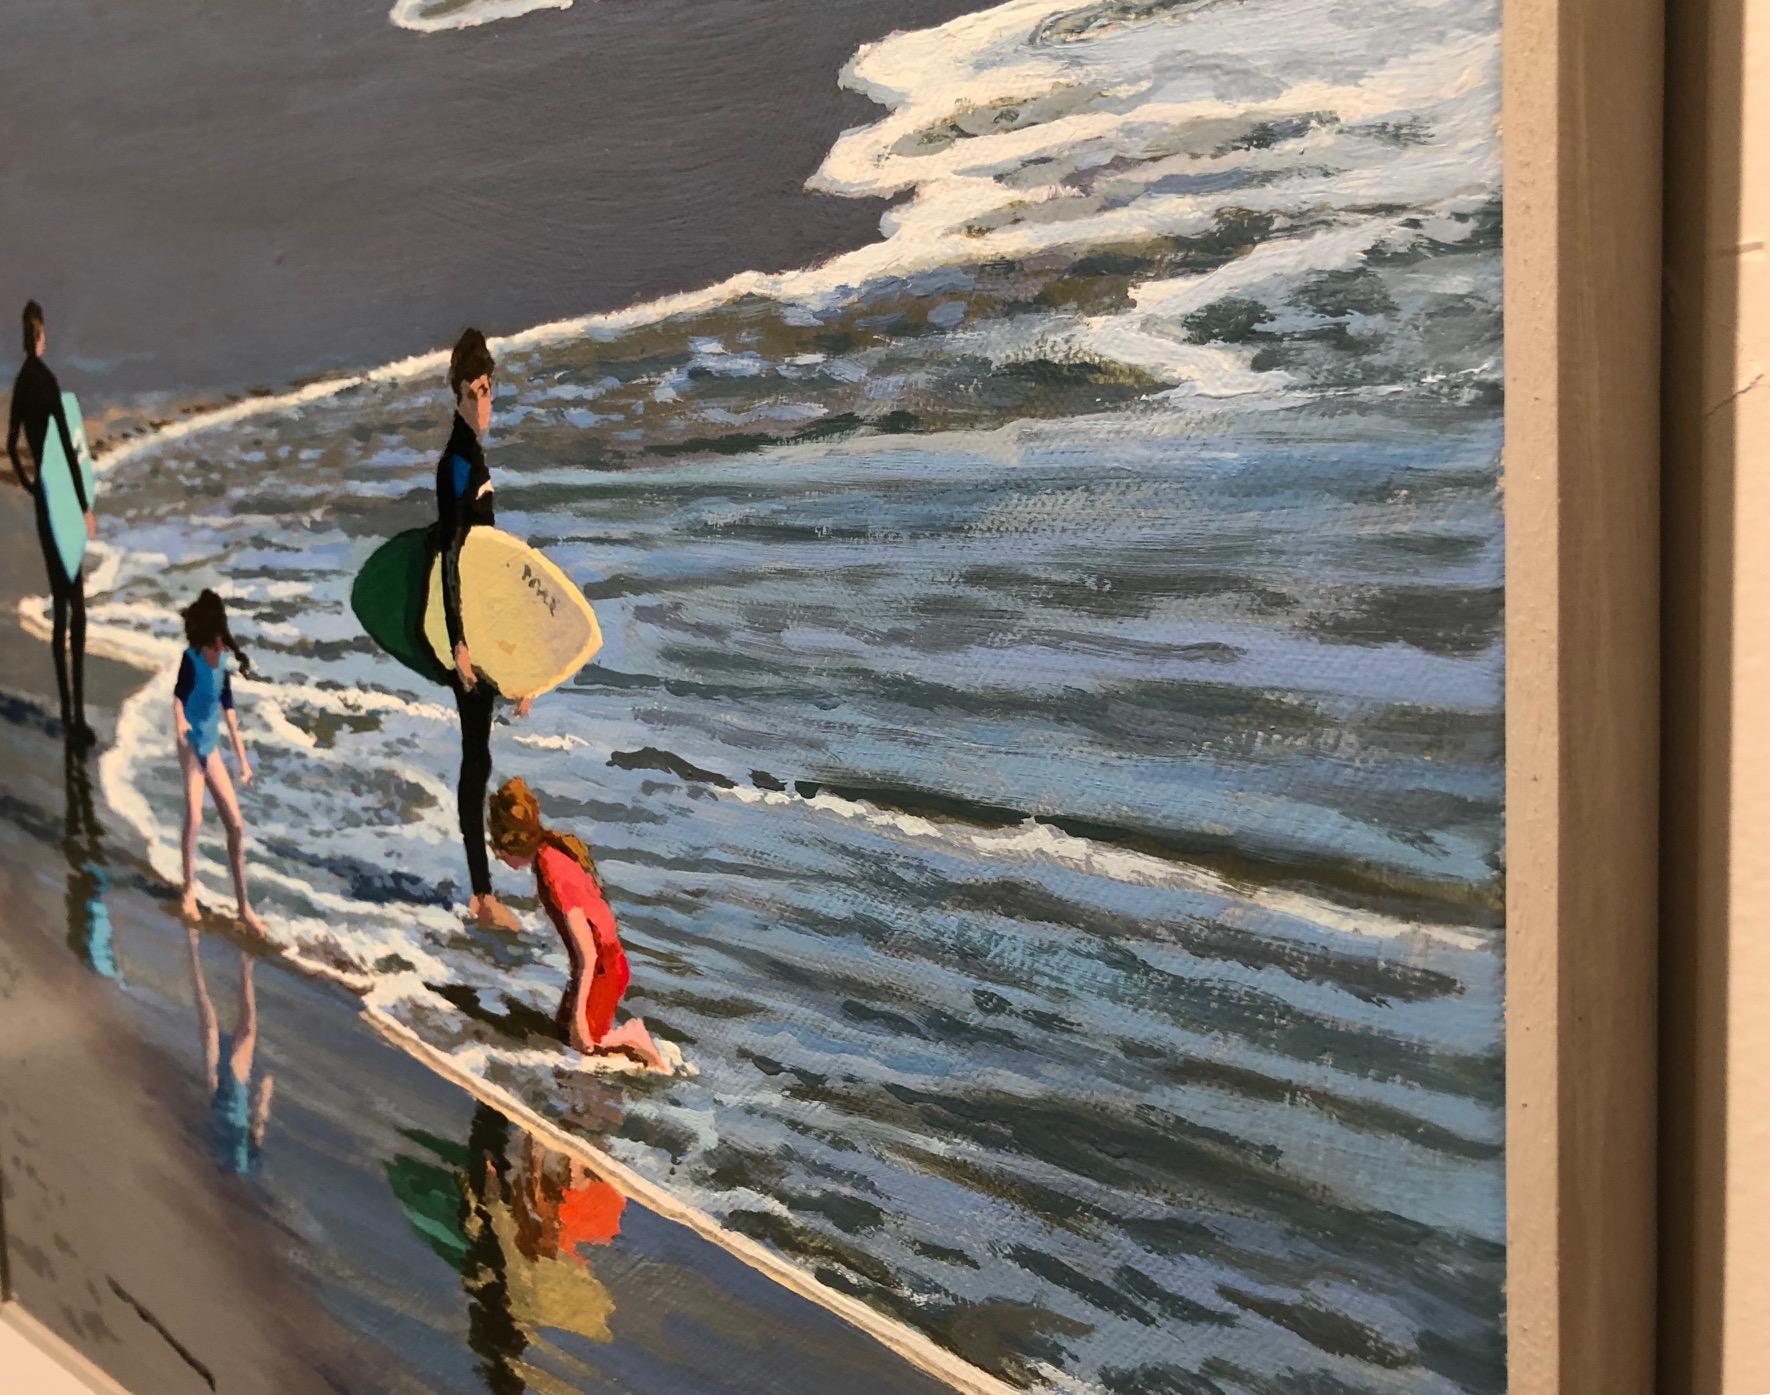 Reflections / surfers and children in oll on canvas - Contemporary Painting by Peter Loftus